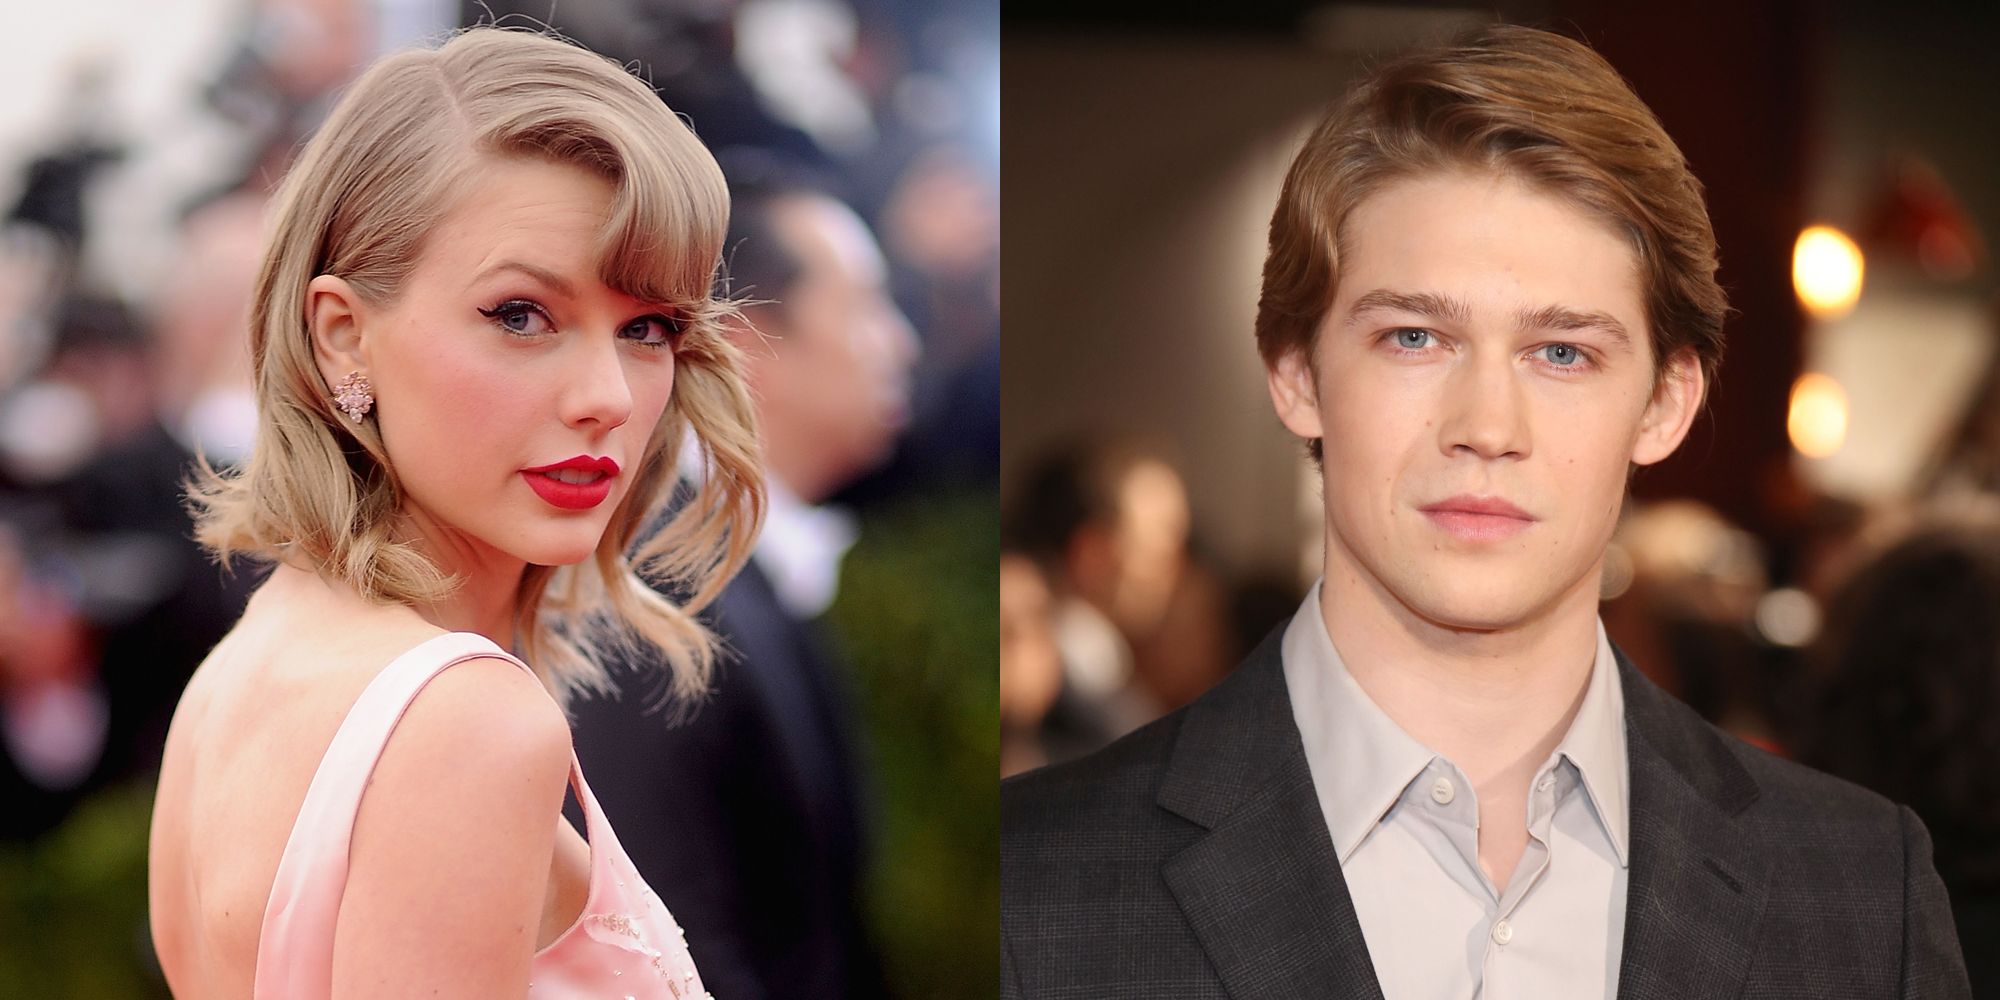 Taylor Swift And Joe Alwyn'S Relationship Complete Timeline Up To Breakup